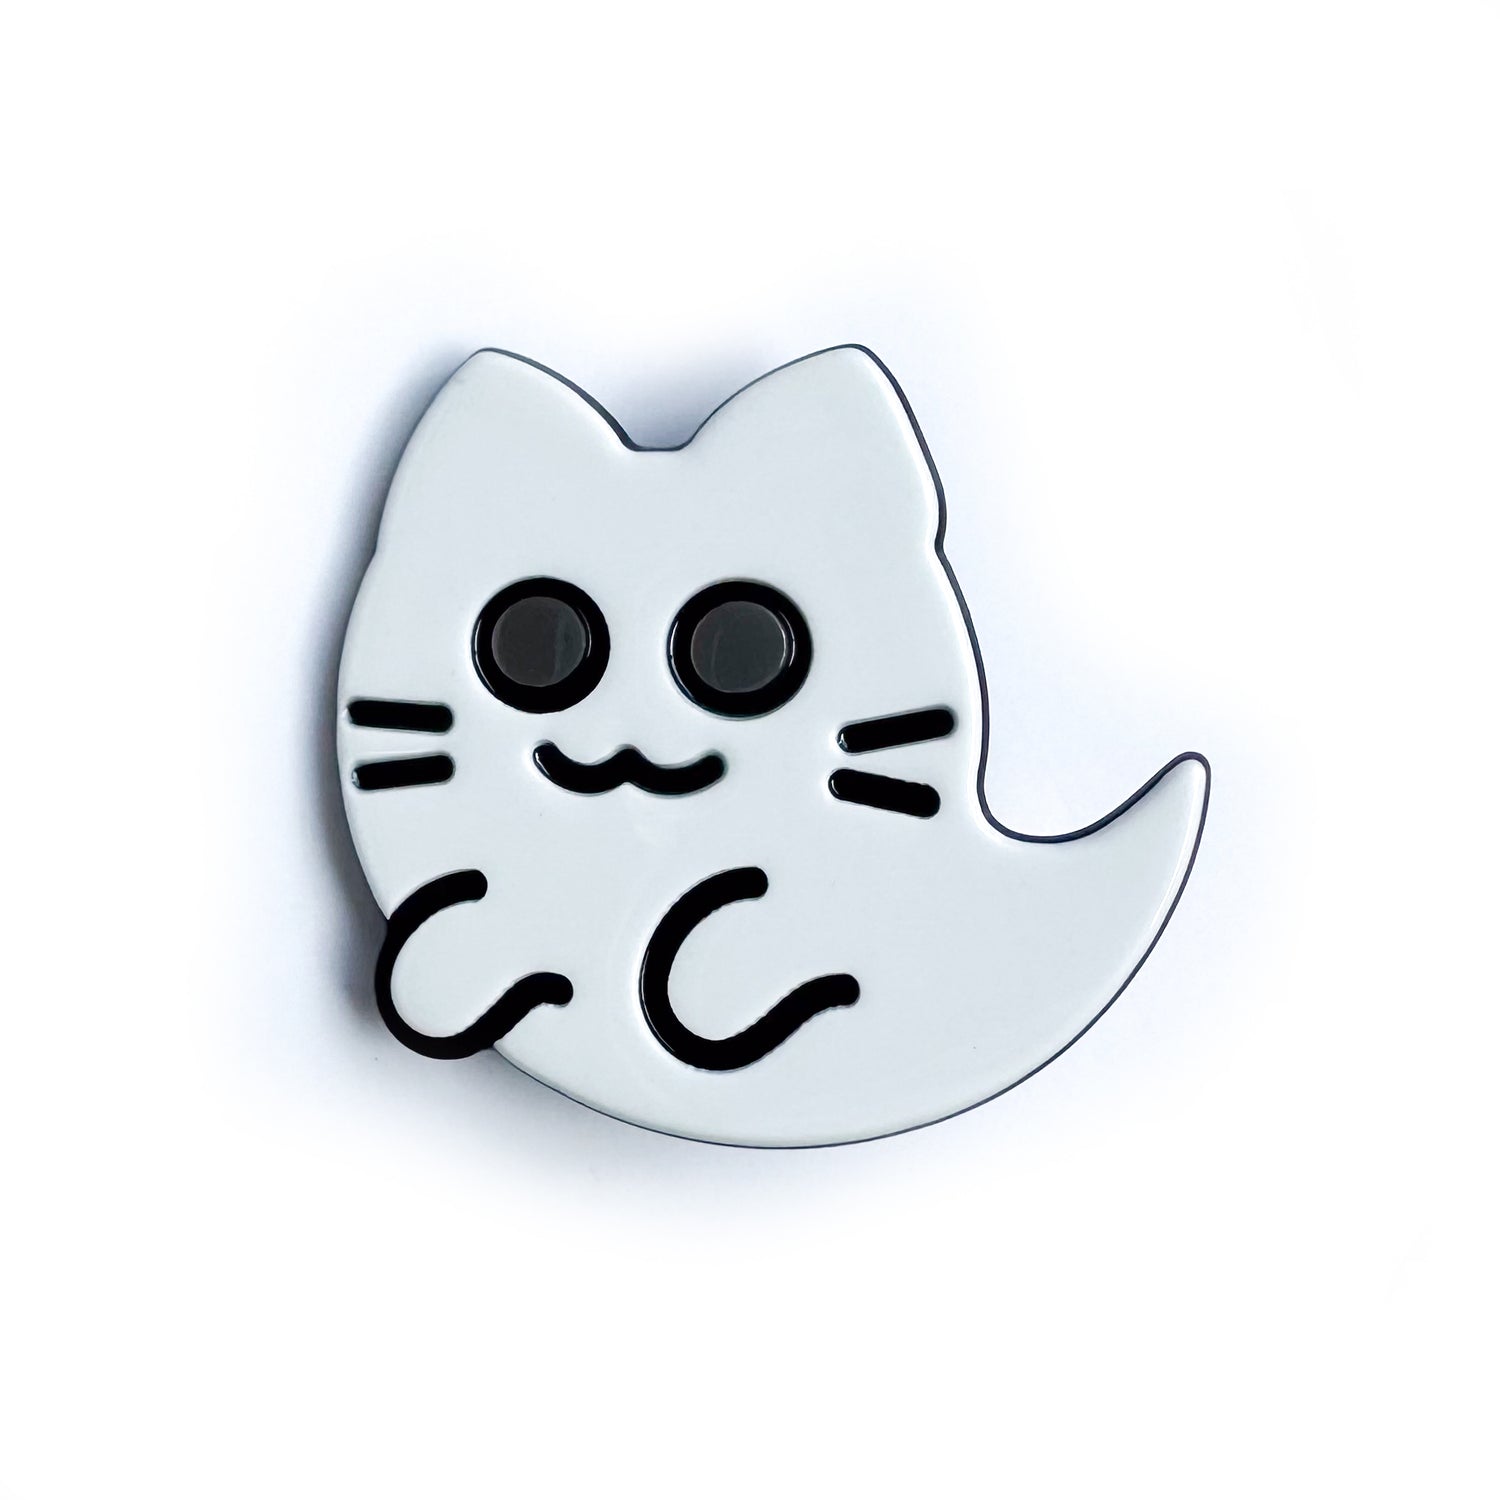 An acetate hair clip shaped like a ghost kitty, with a cute kitty mouth and whiskers.